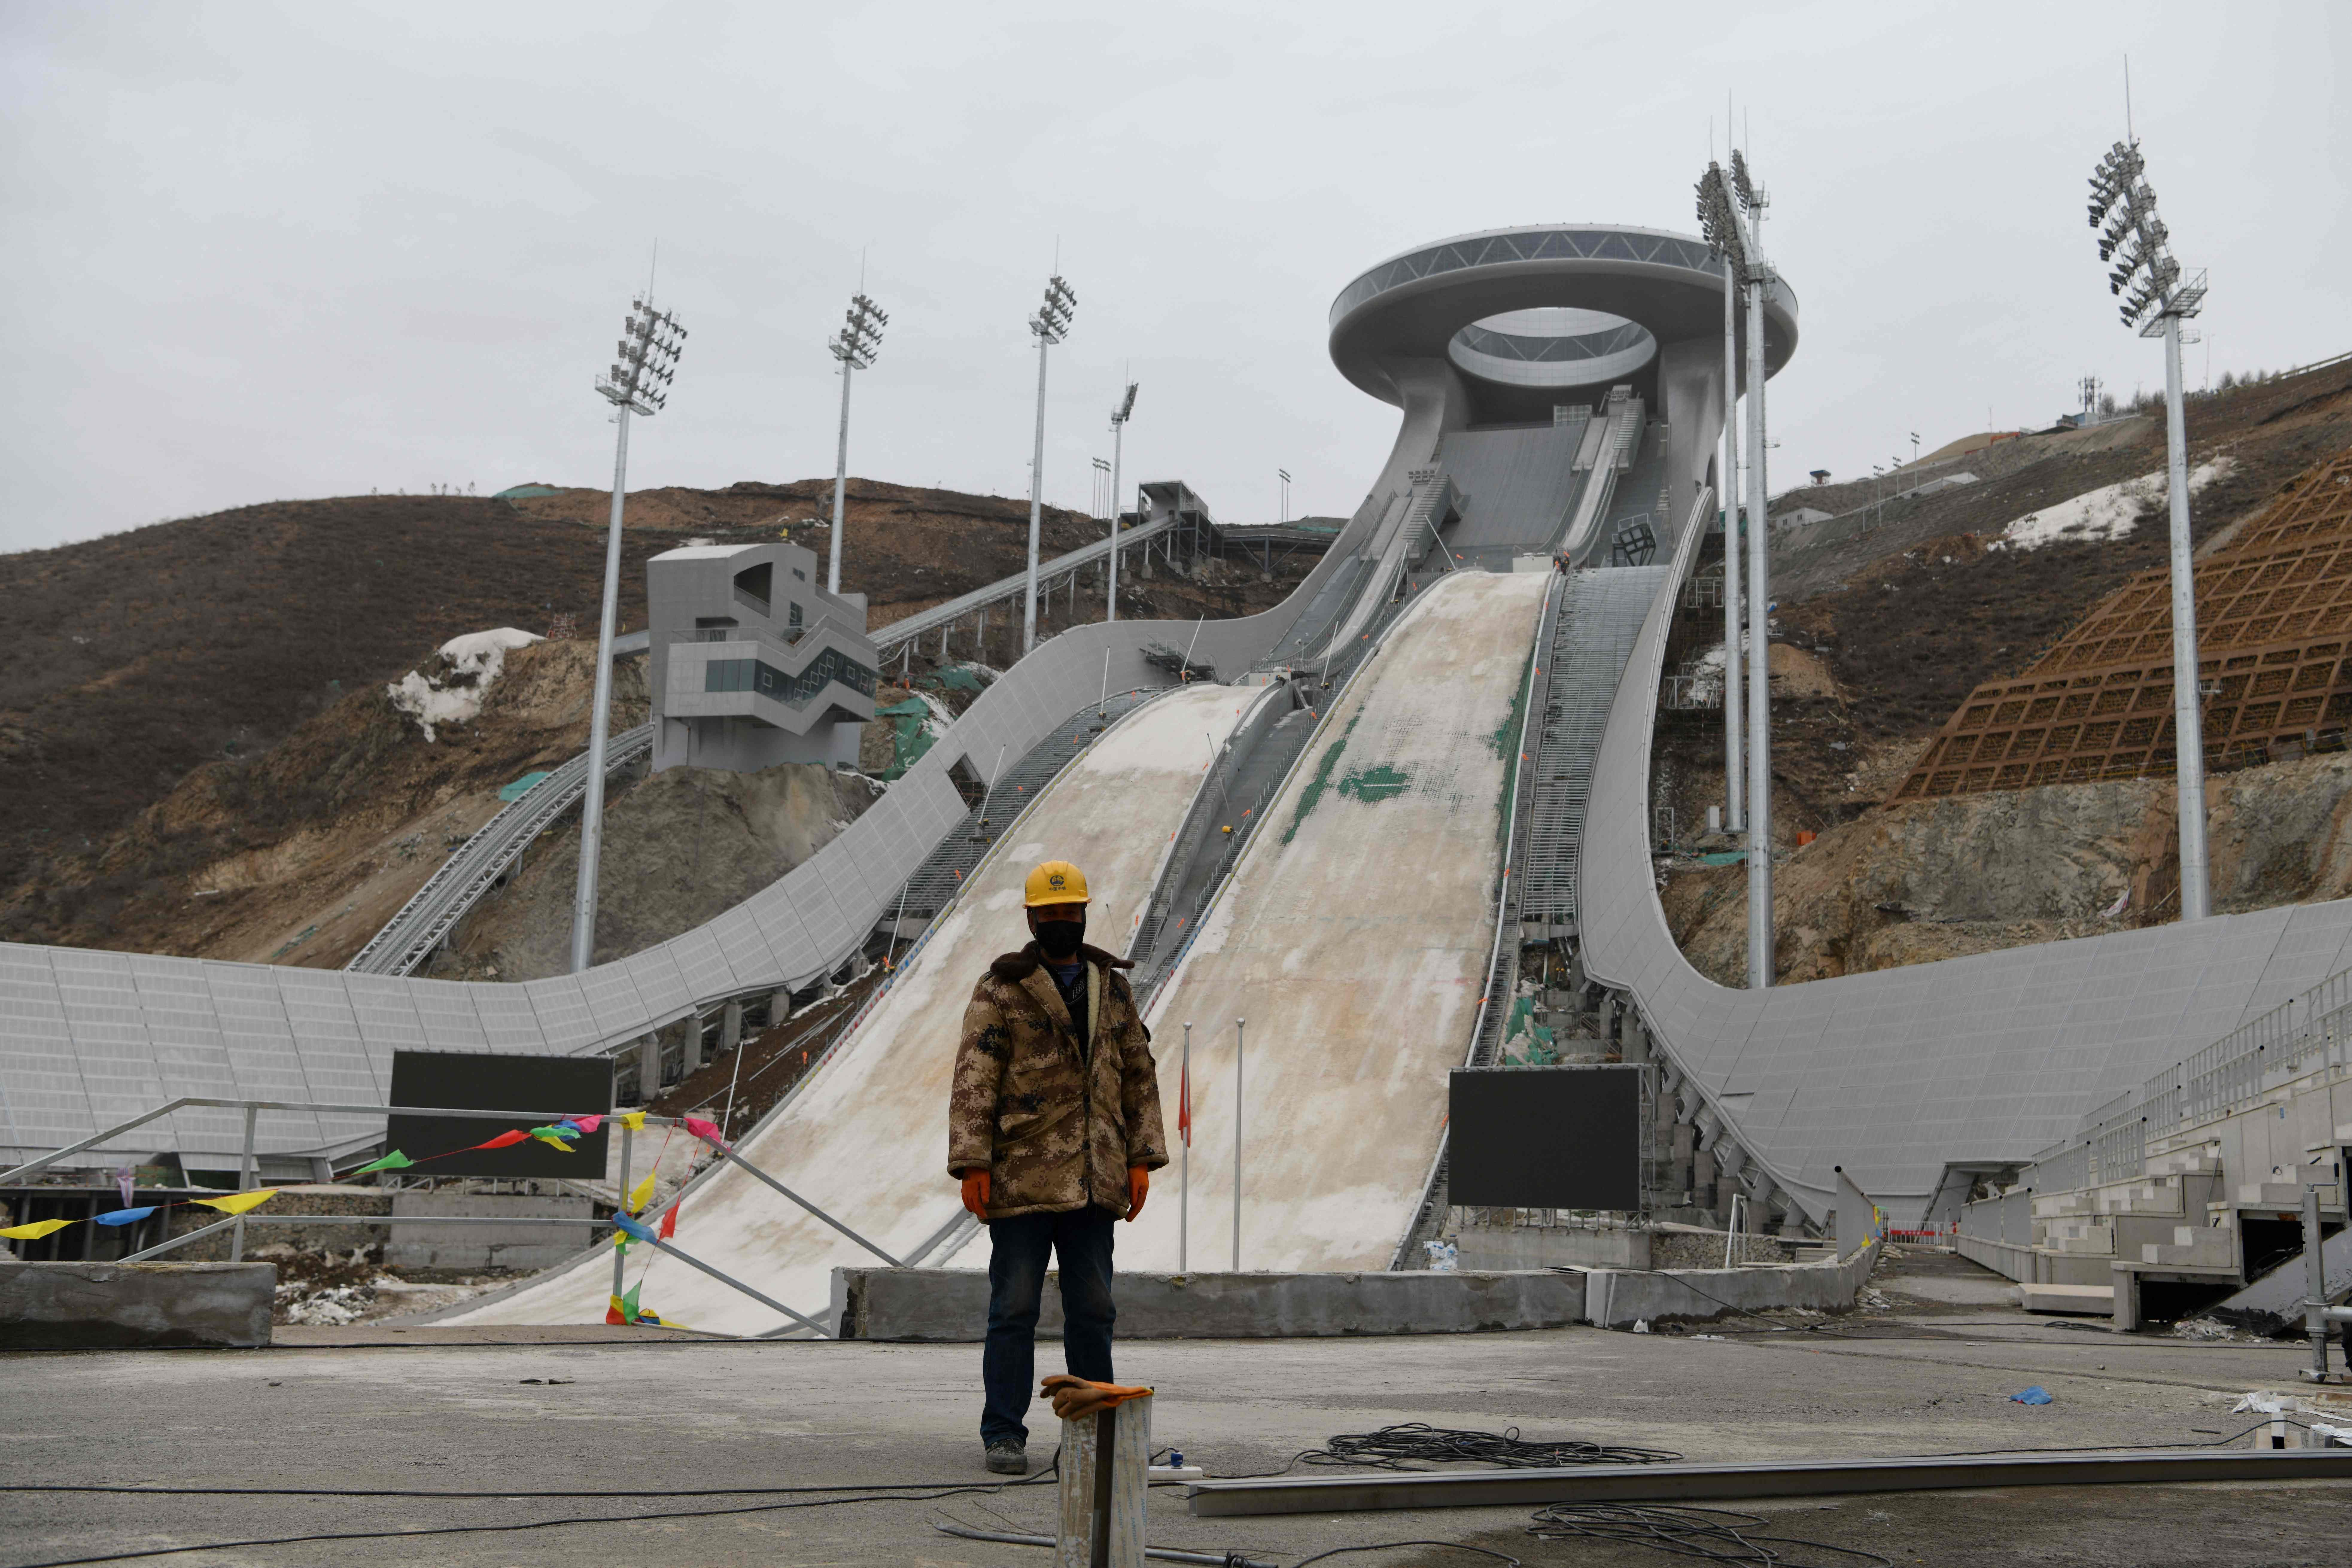 A worker stands at the base of the under-construction ski jumping venue for the 2022 Beijing Winter Olympic Games in Zhangjiakou, 200km northwest of Beijing, on March 17. Photo: AFP